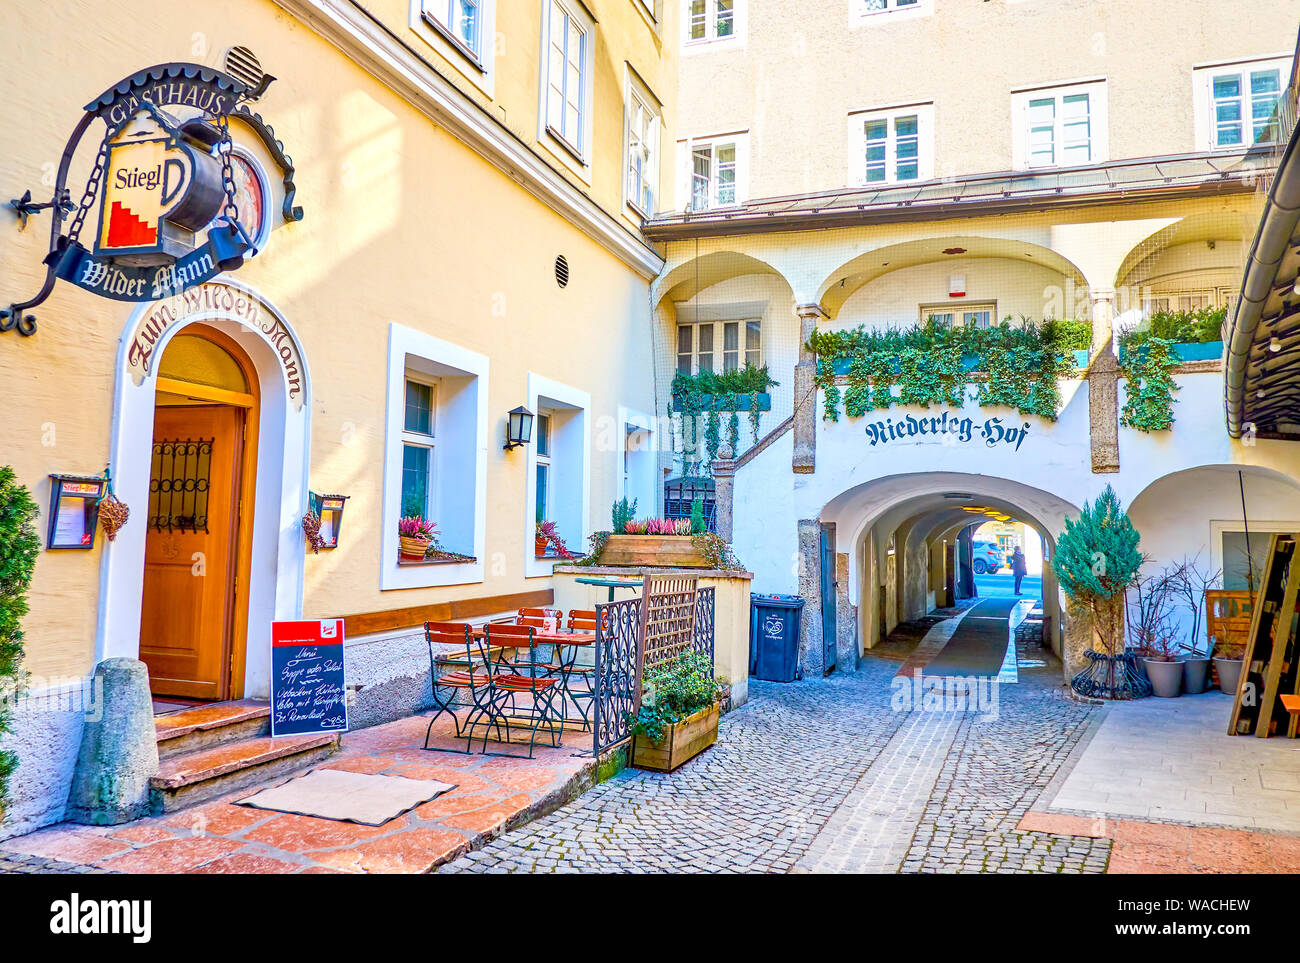 SALZBURG, AUSTRIA - FEBRUARY 27, 2019: The small inner courtyard in Altstadt with cozy restaurant's outdoor terrace, on February 27 in Salzburg Stock Photo